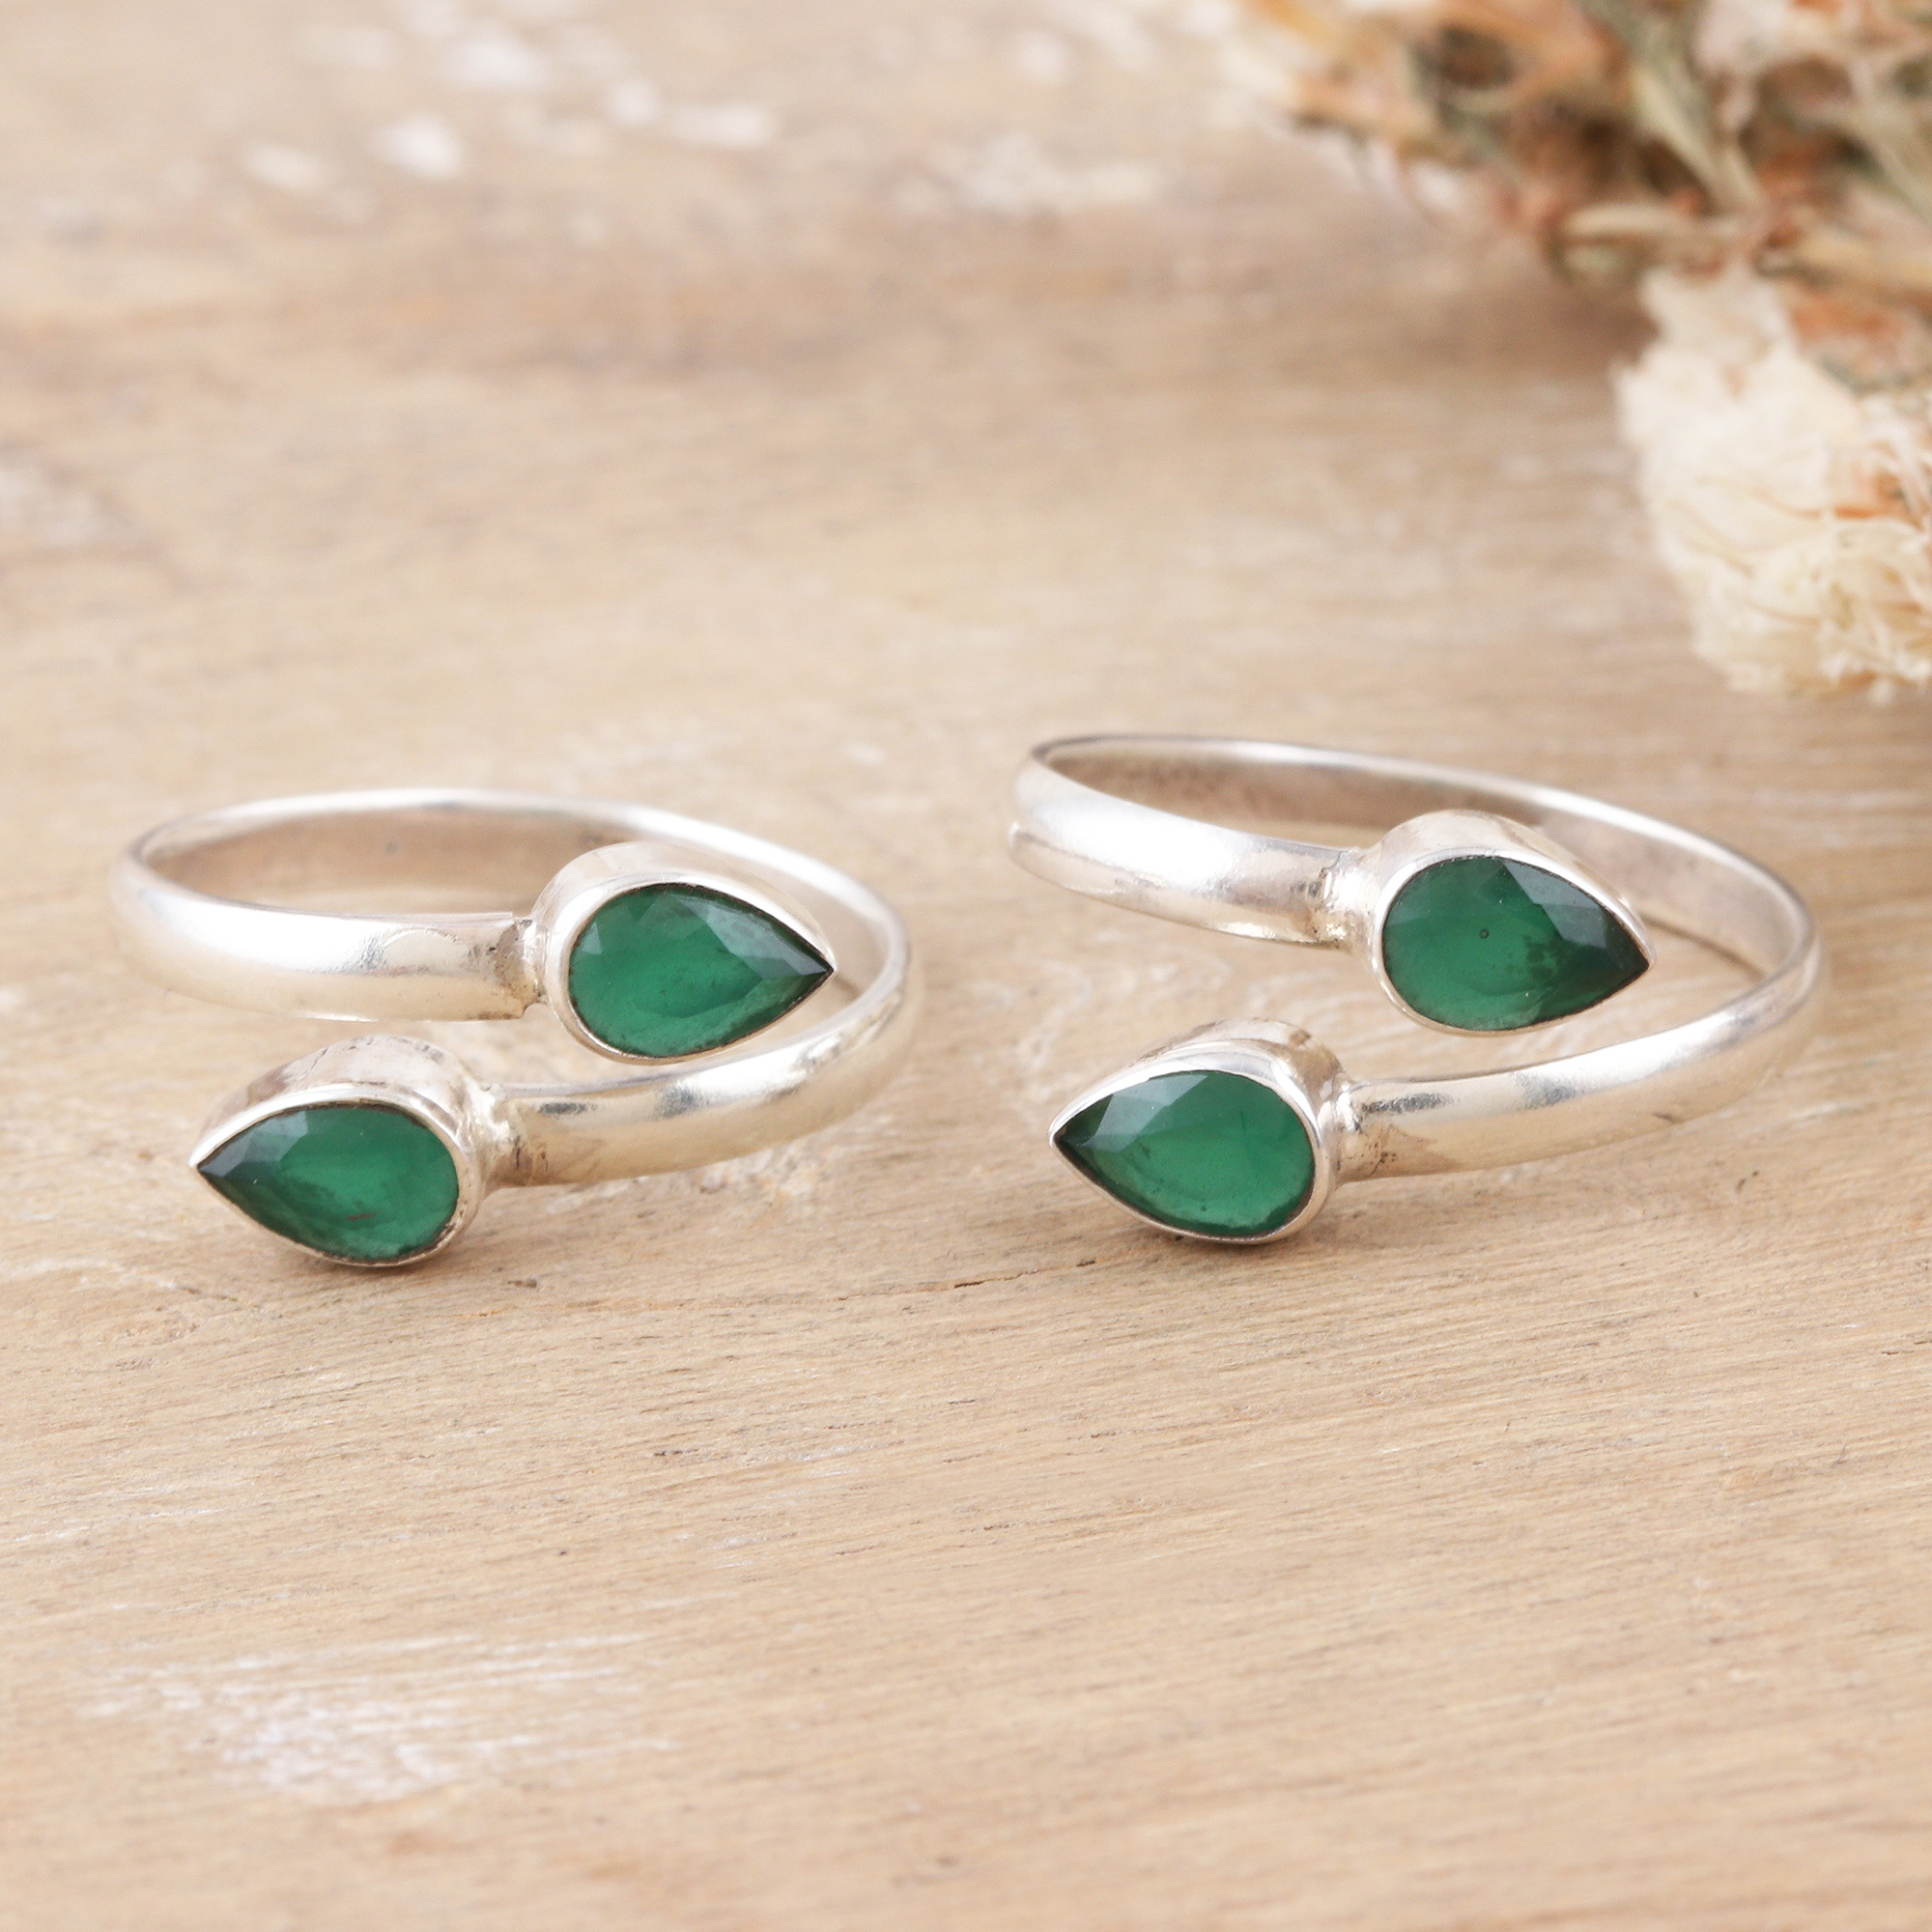 Sterling Silver Toe Rings with Green Onyx Stones (Pair) - Mystic